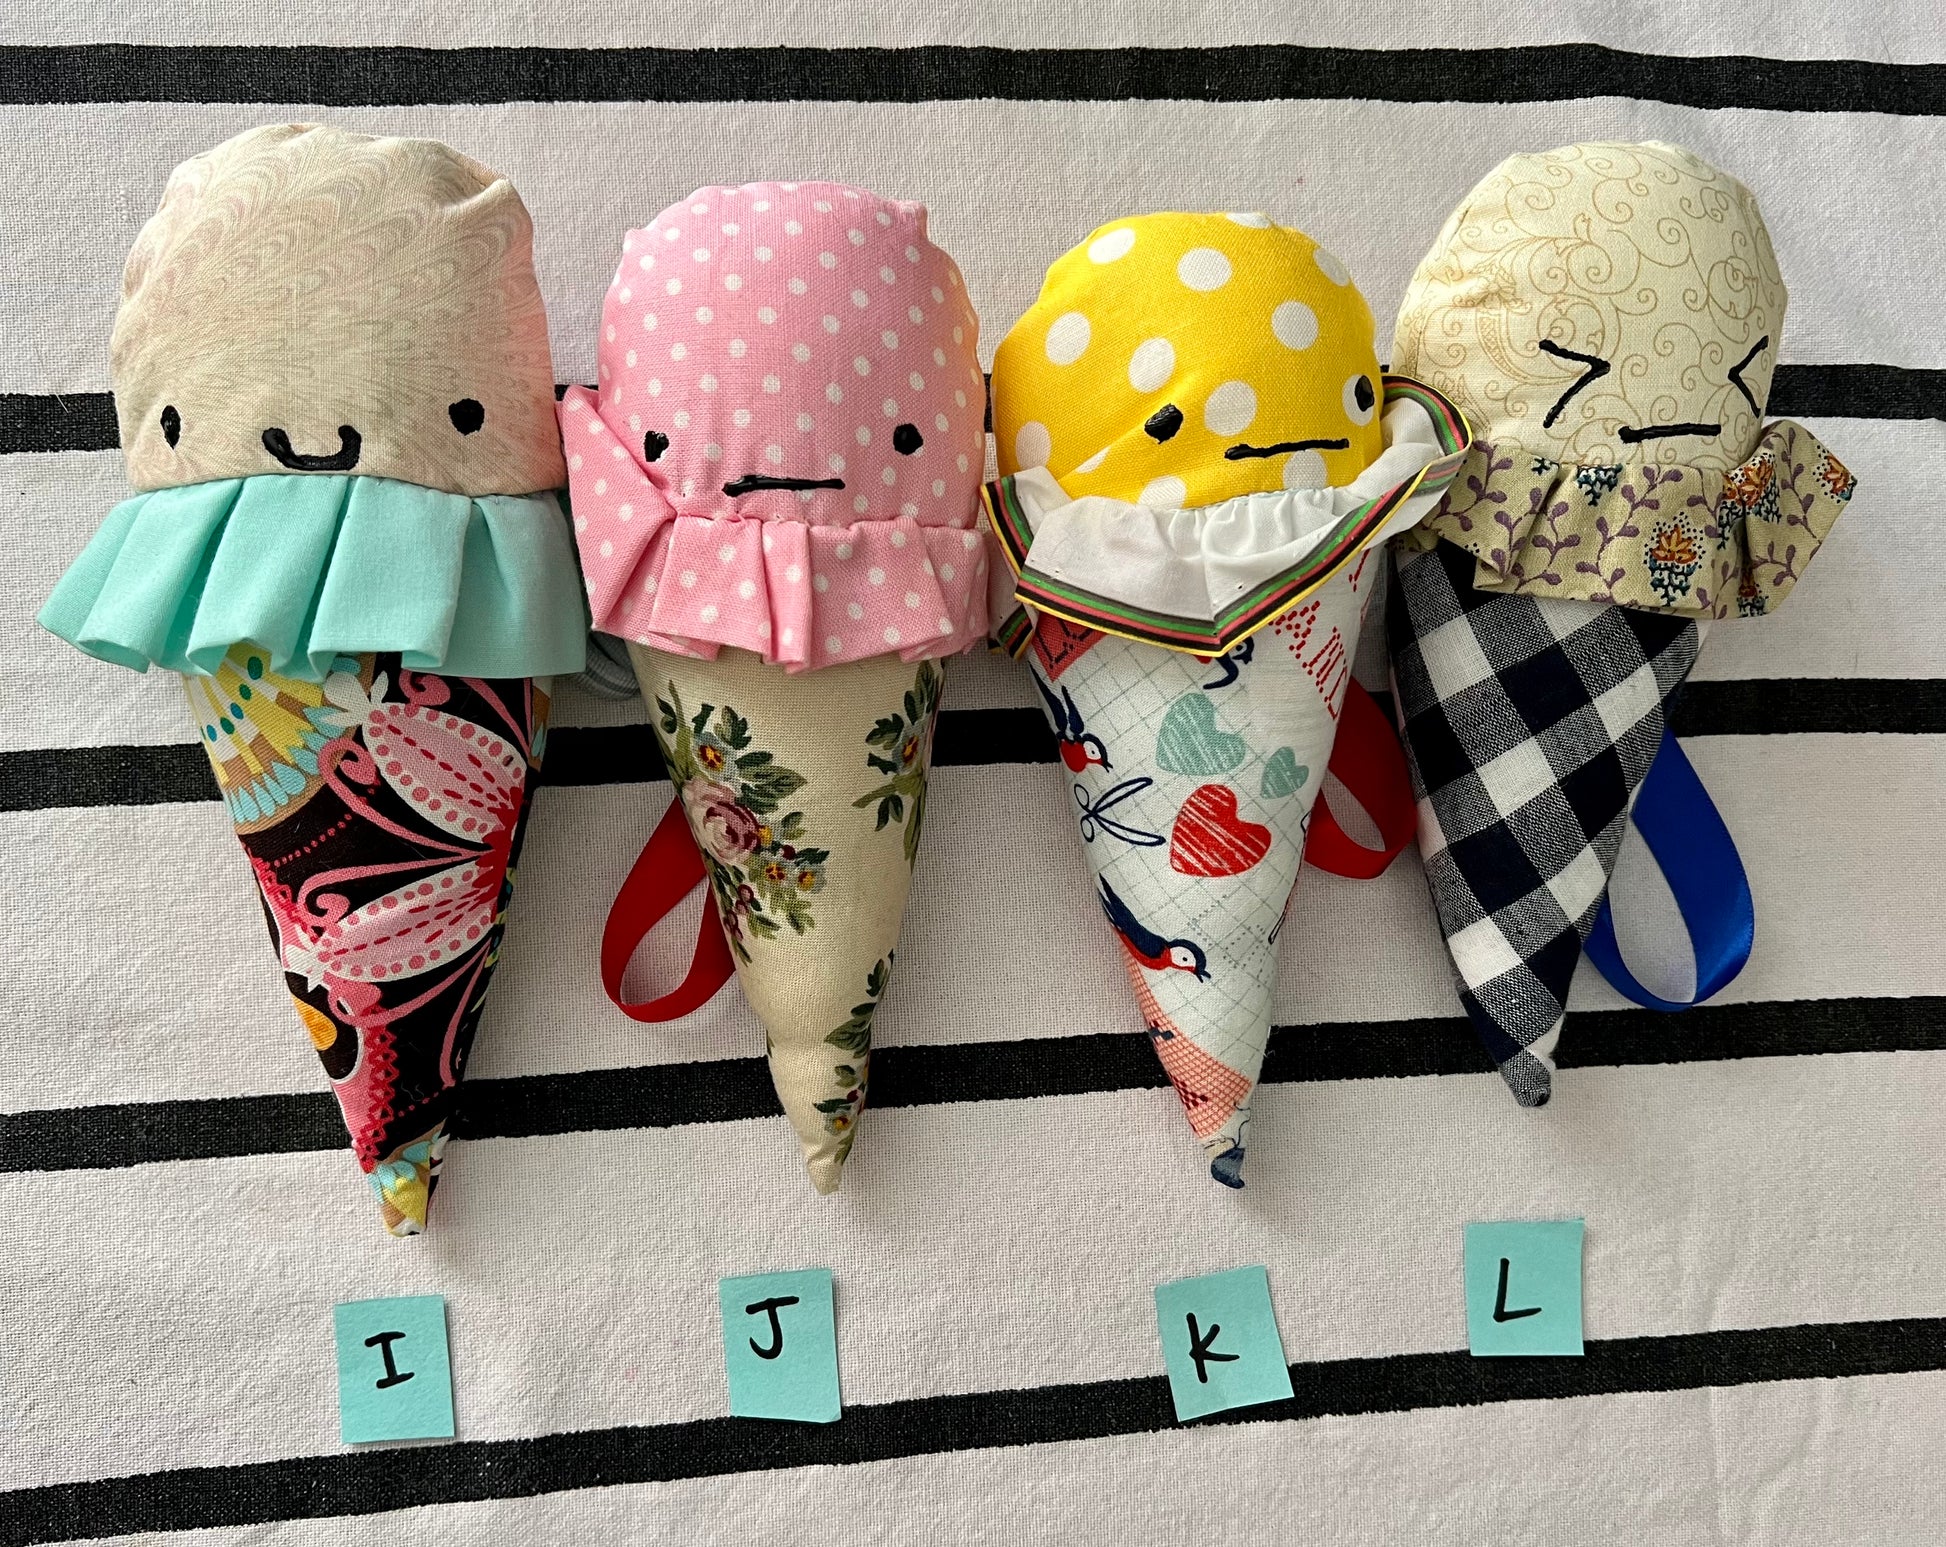 Ice cream cone plushies with handpainted faces, lined up with the letters I J K L below them